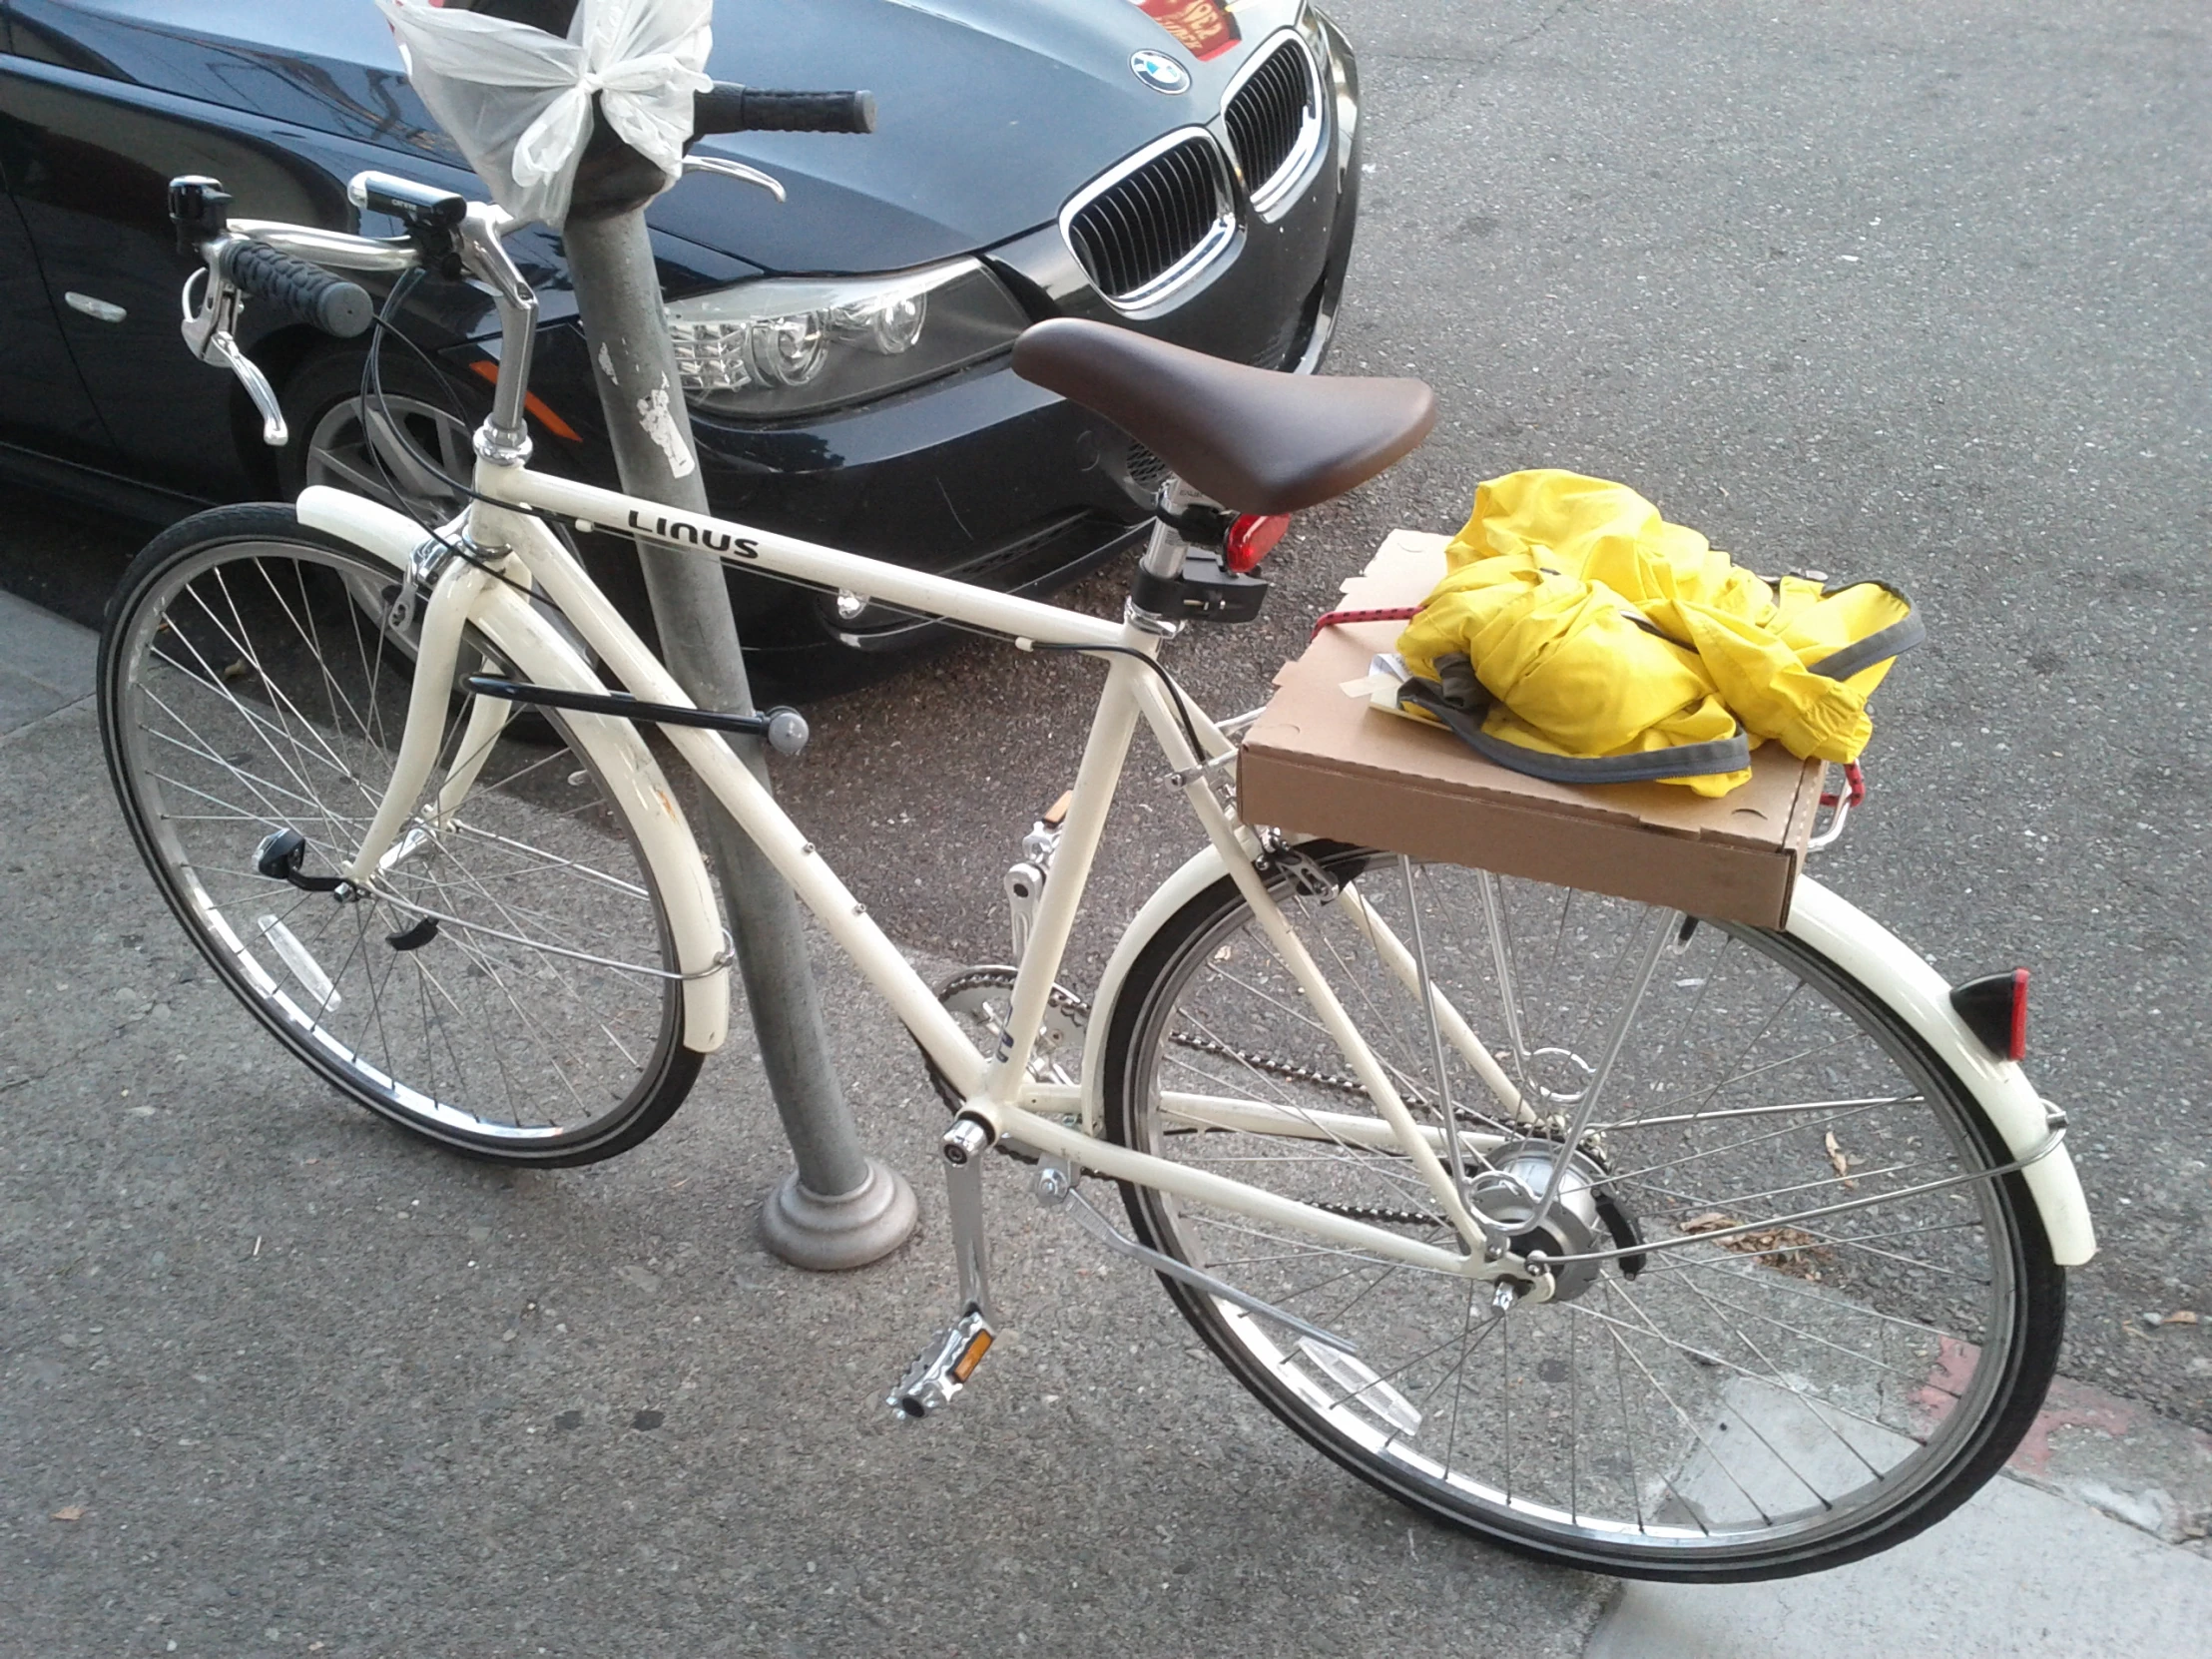 a bike with a box full of yellow gloves parked next to it